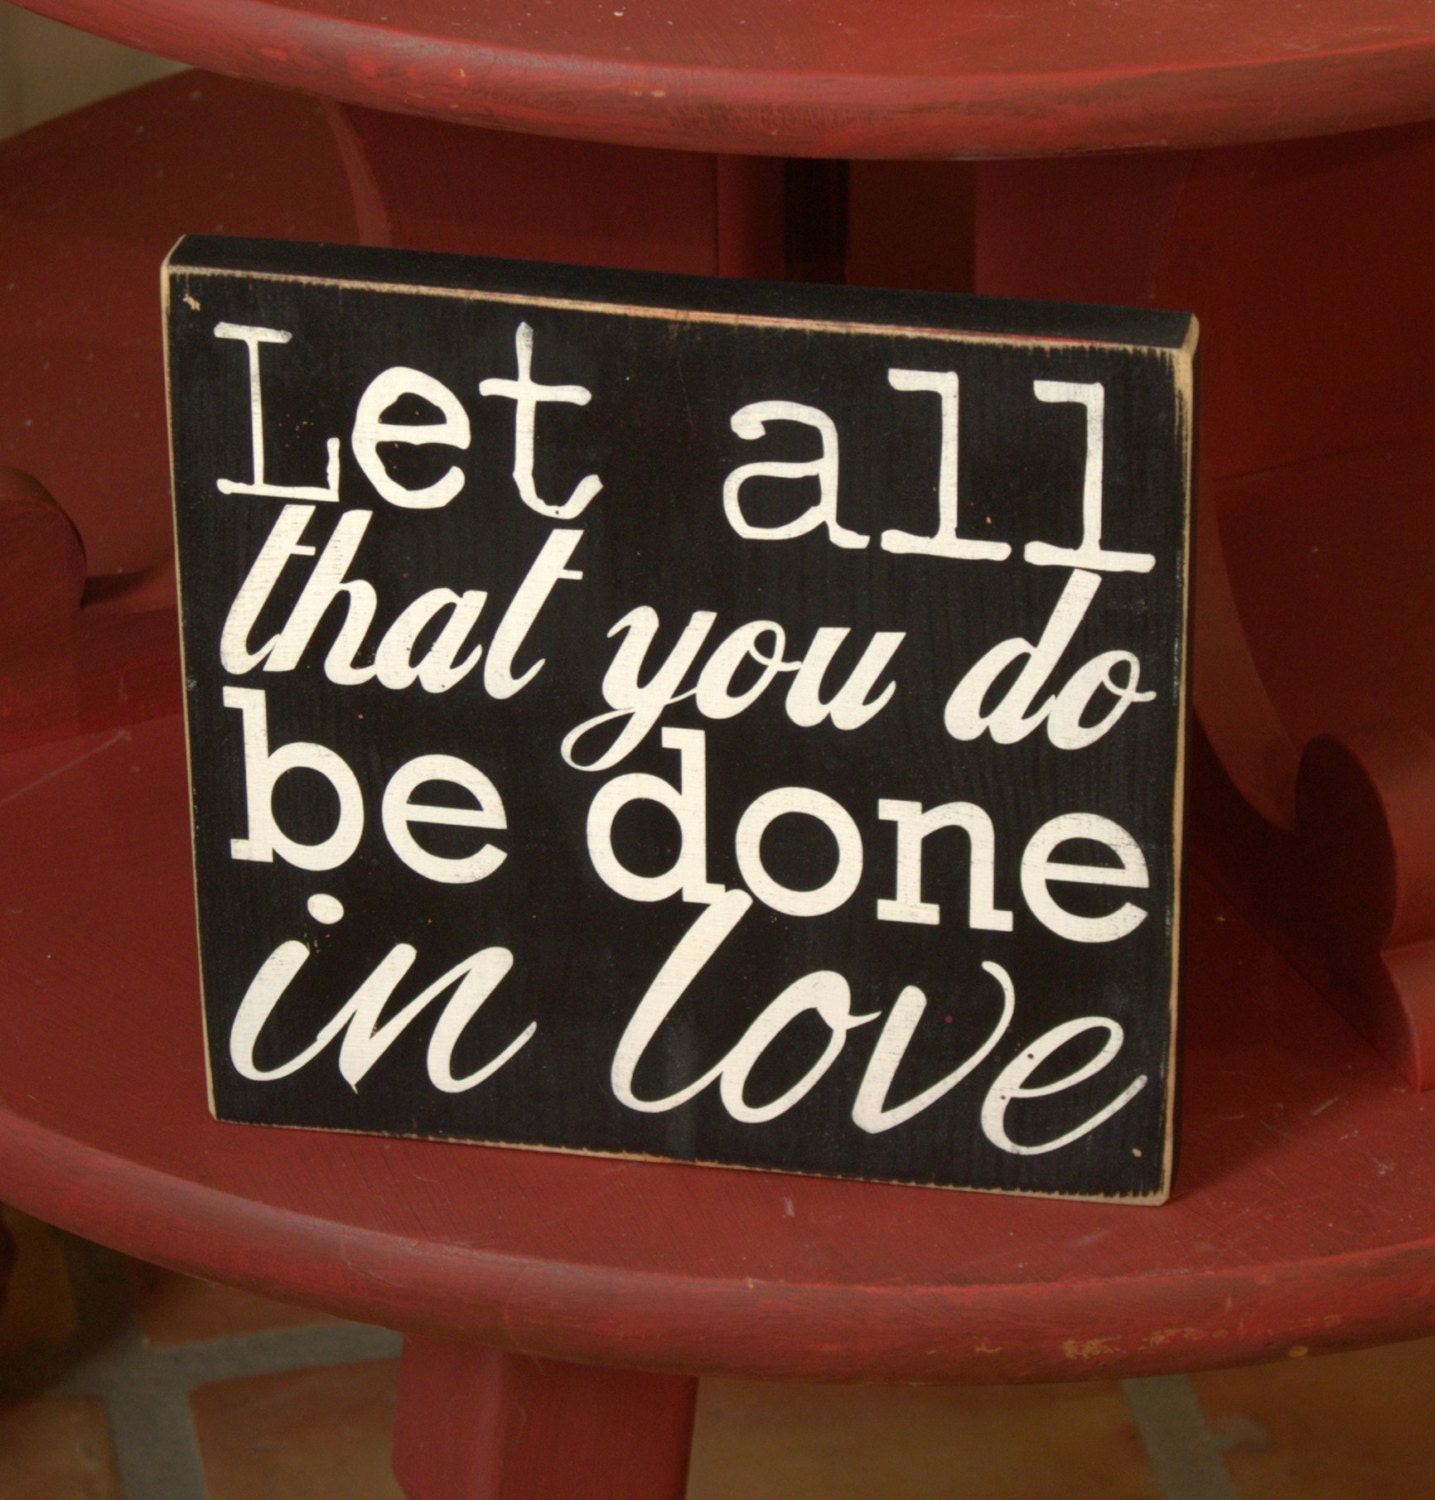 let all that you do be done in love bulletin board